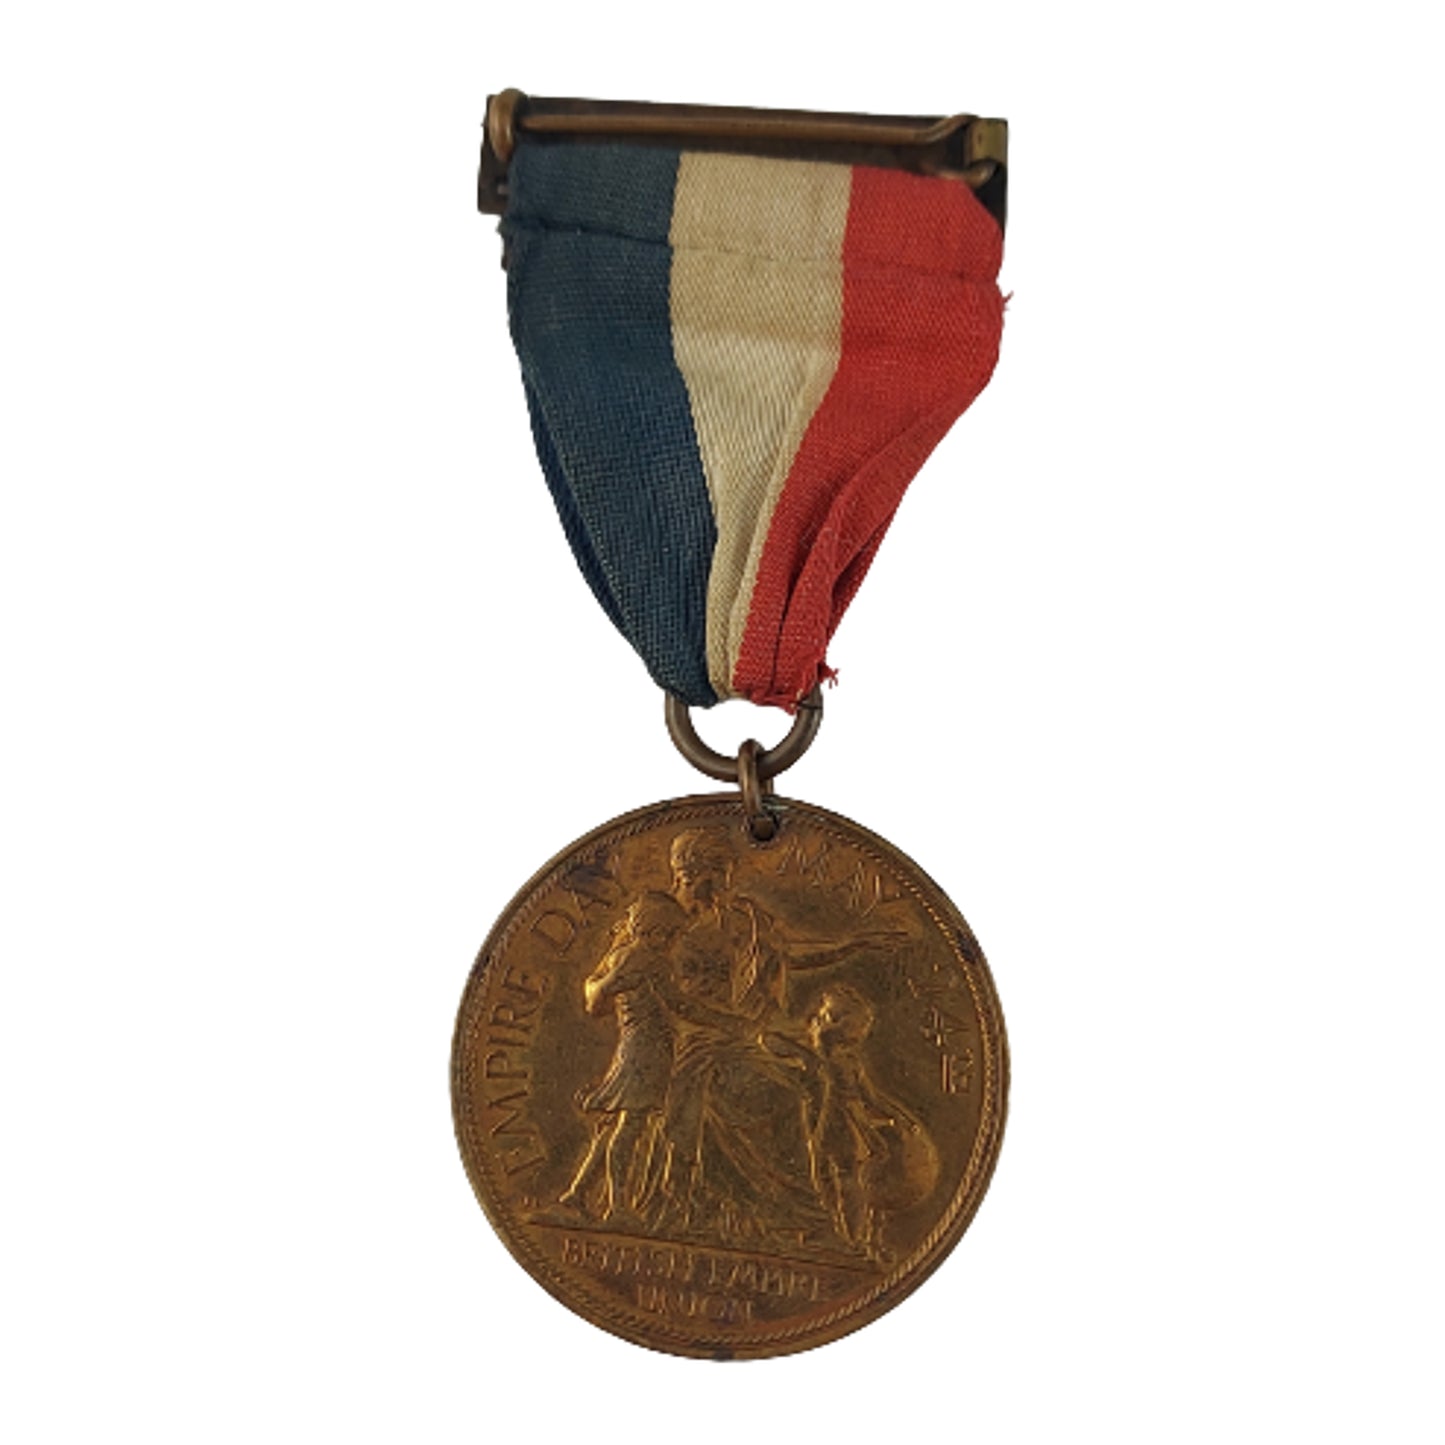 1929 British Empire Day Medal